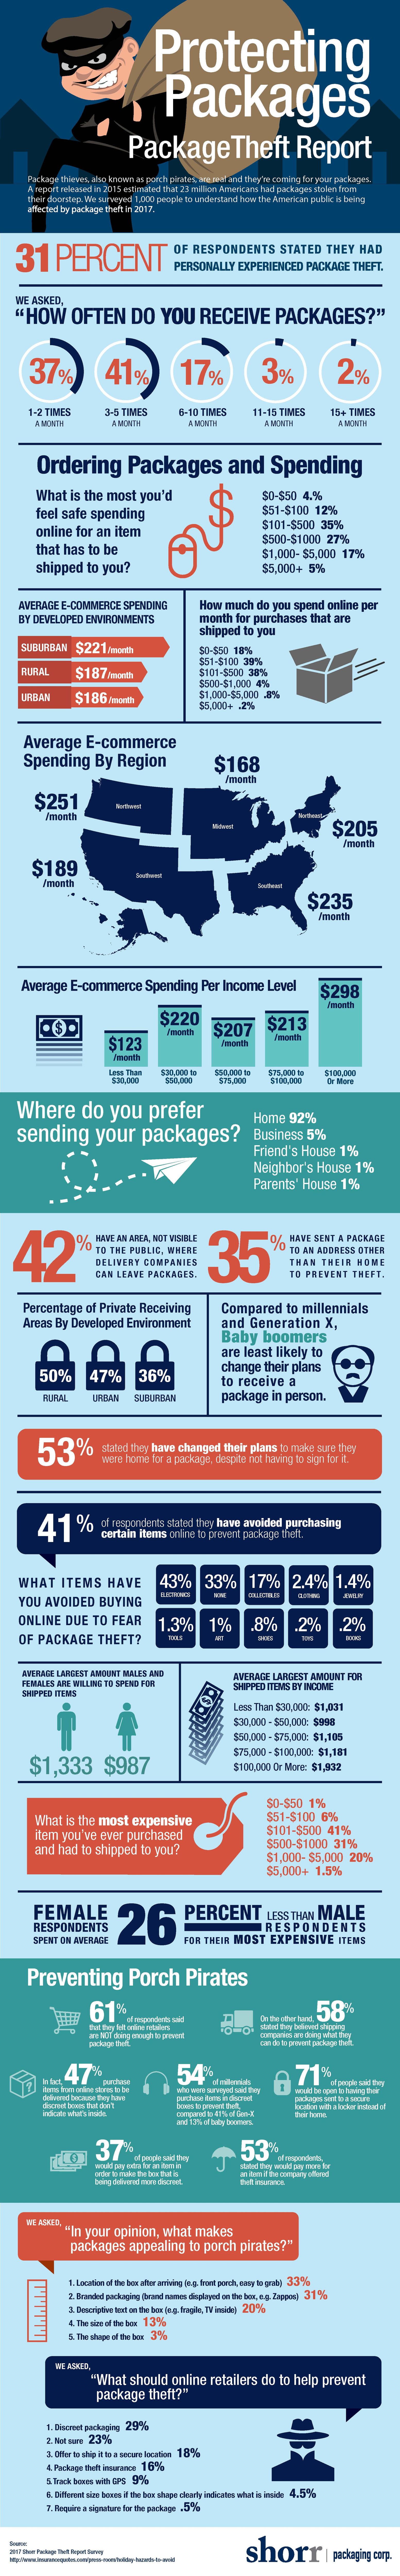 blog infographic shorr packaging protecting packages theft report